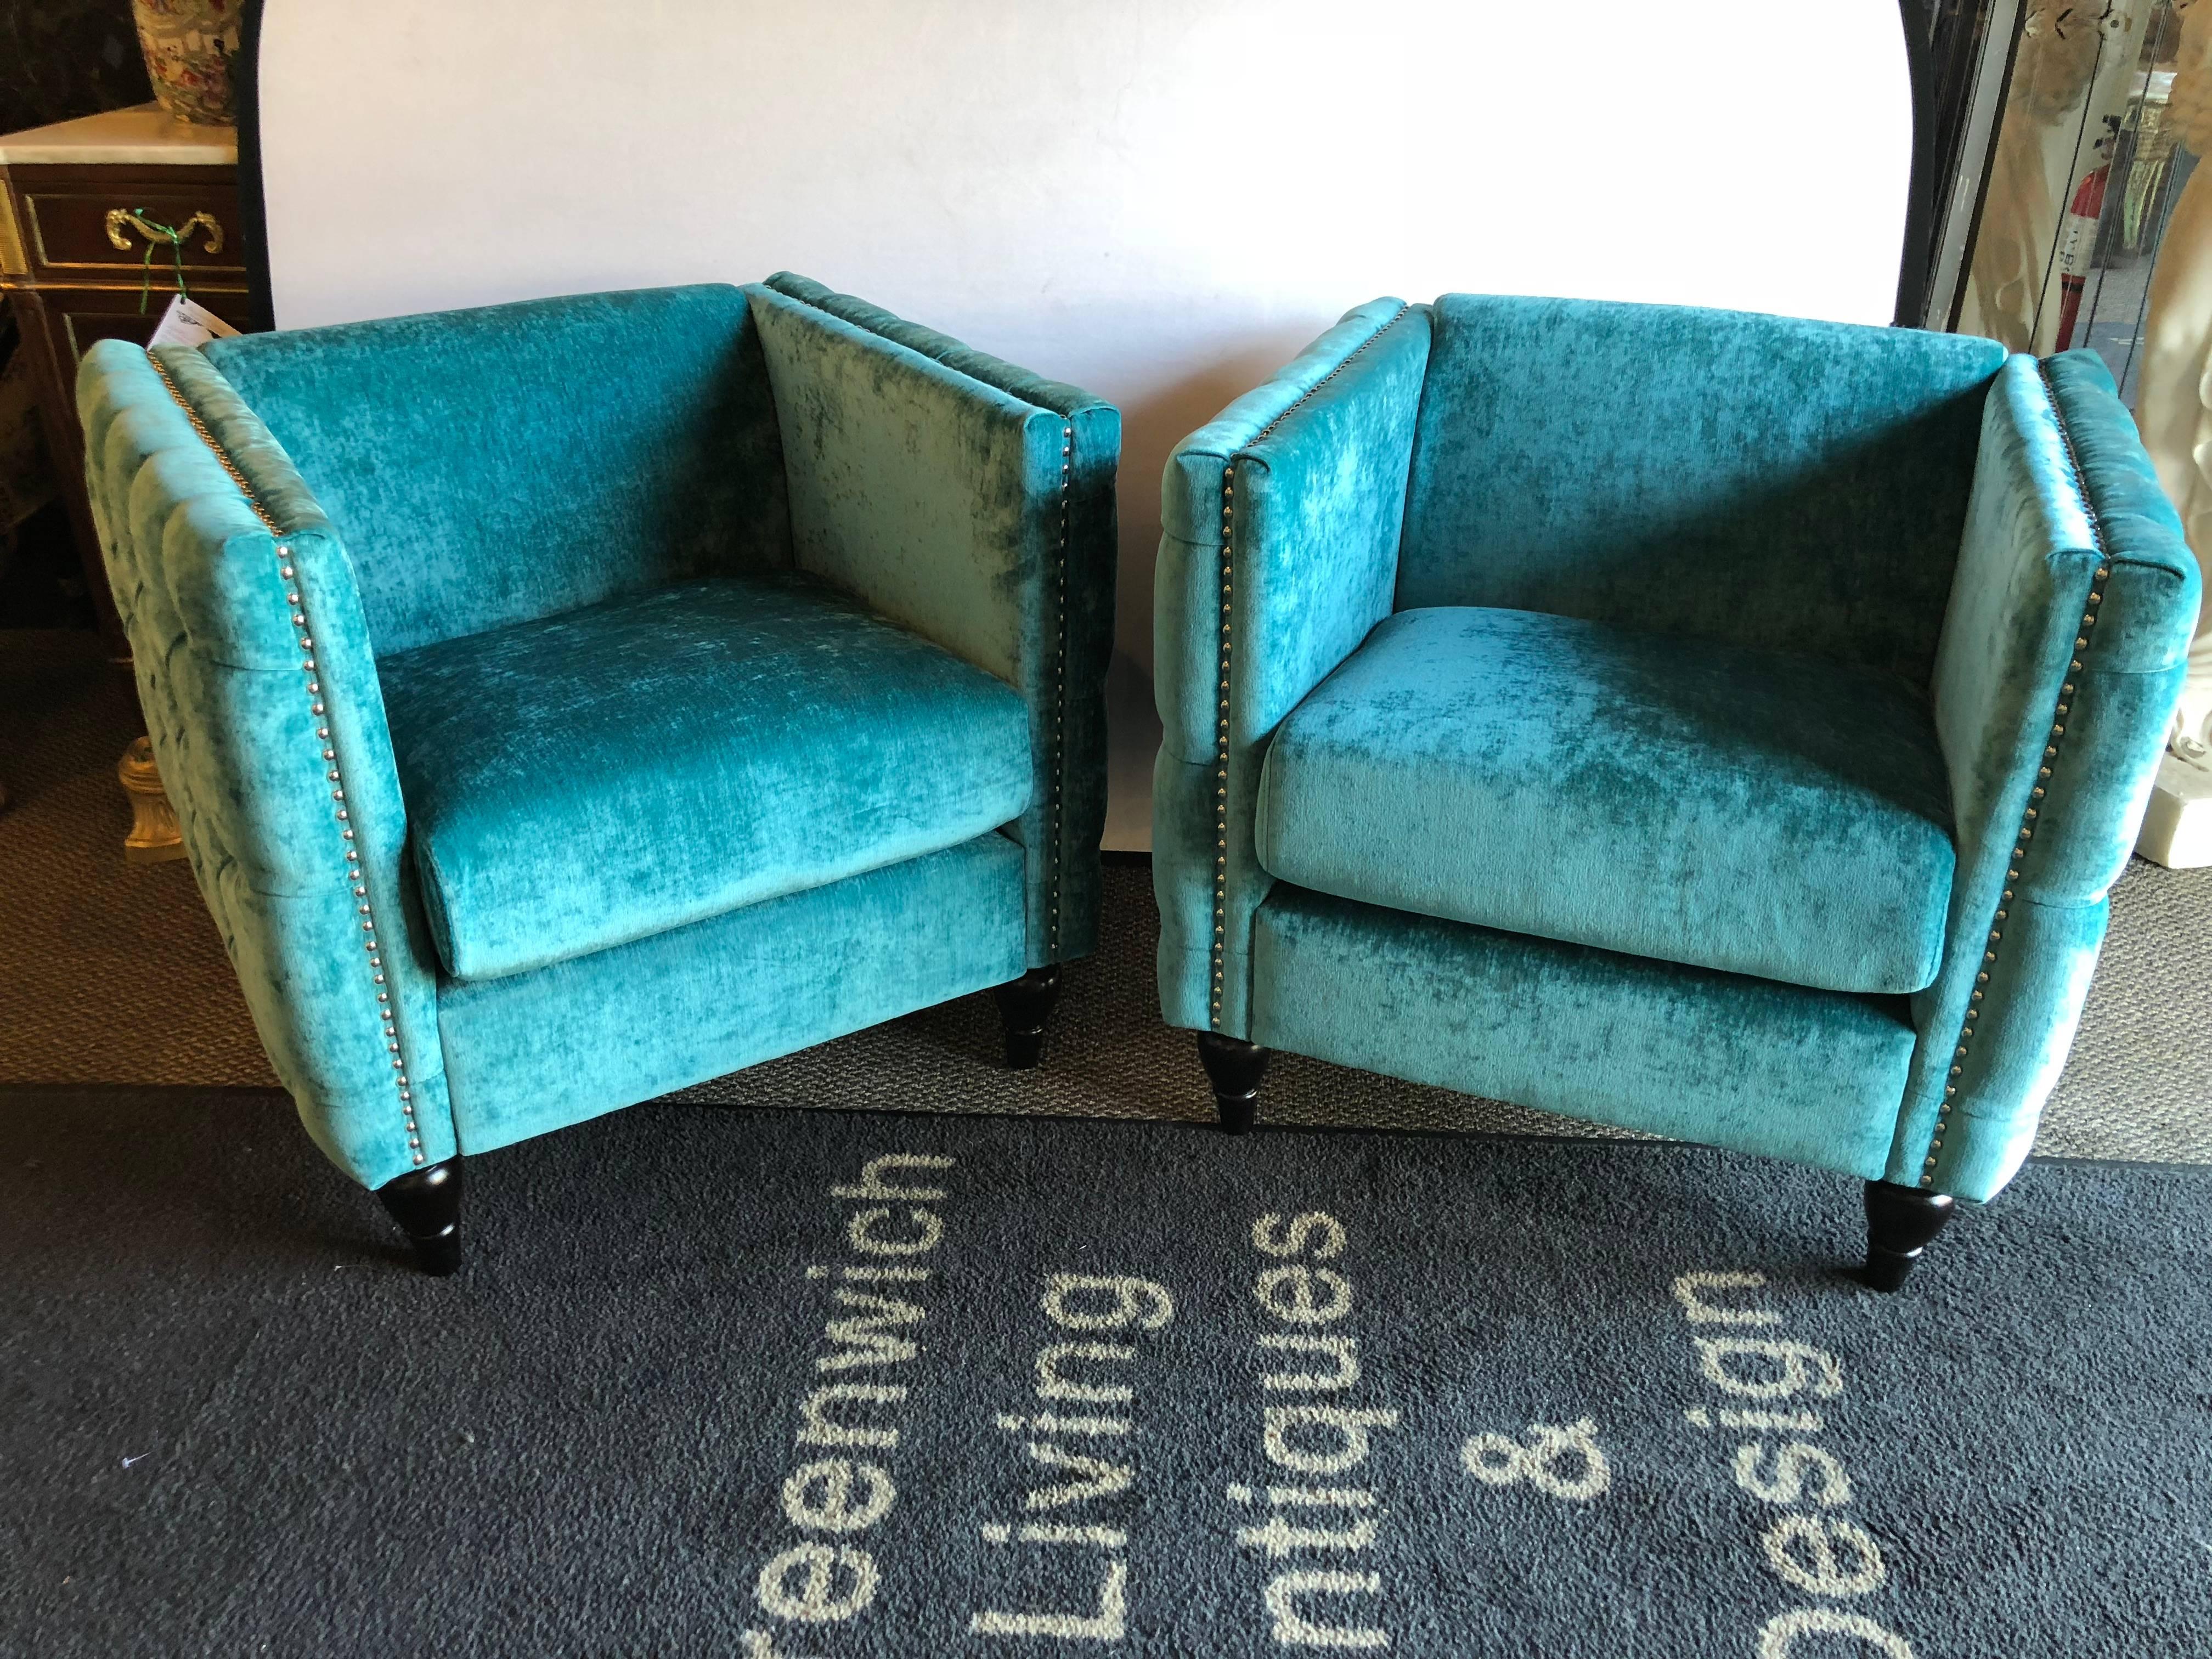 Pair of teal tufted oversized box form armchairs. Each of these finely upholstered and colorful arm chairs have tufted sides. Both sit on ebony bulbous legs and have chrome tacked sides.